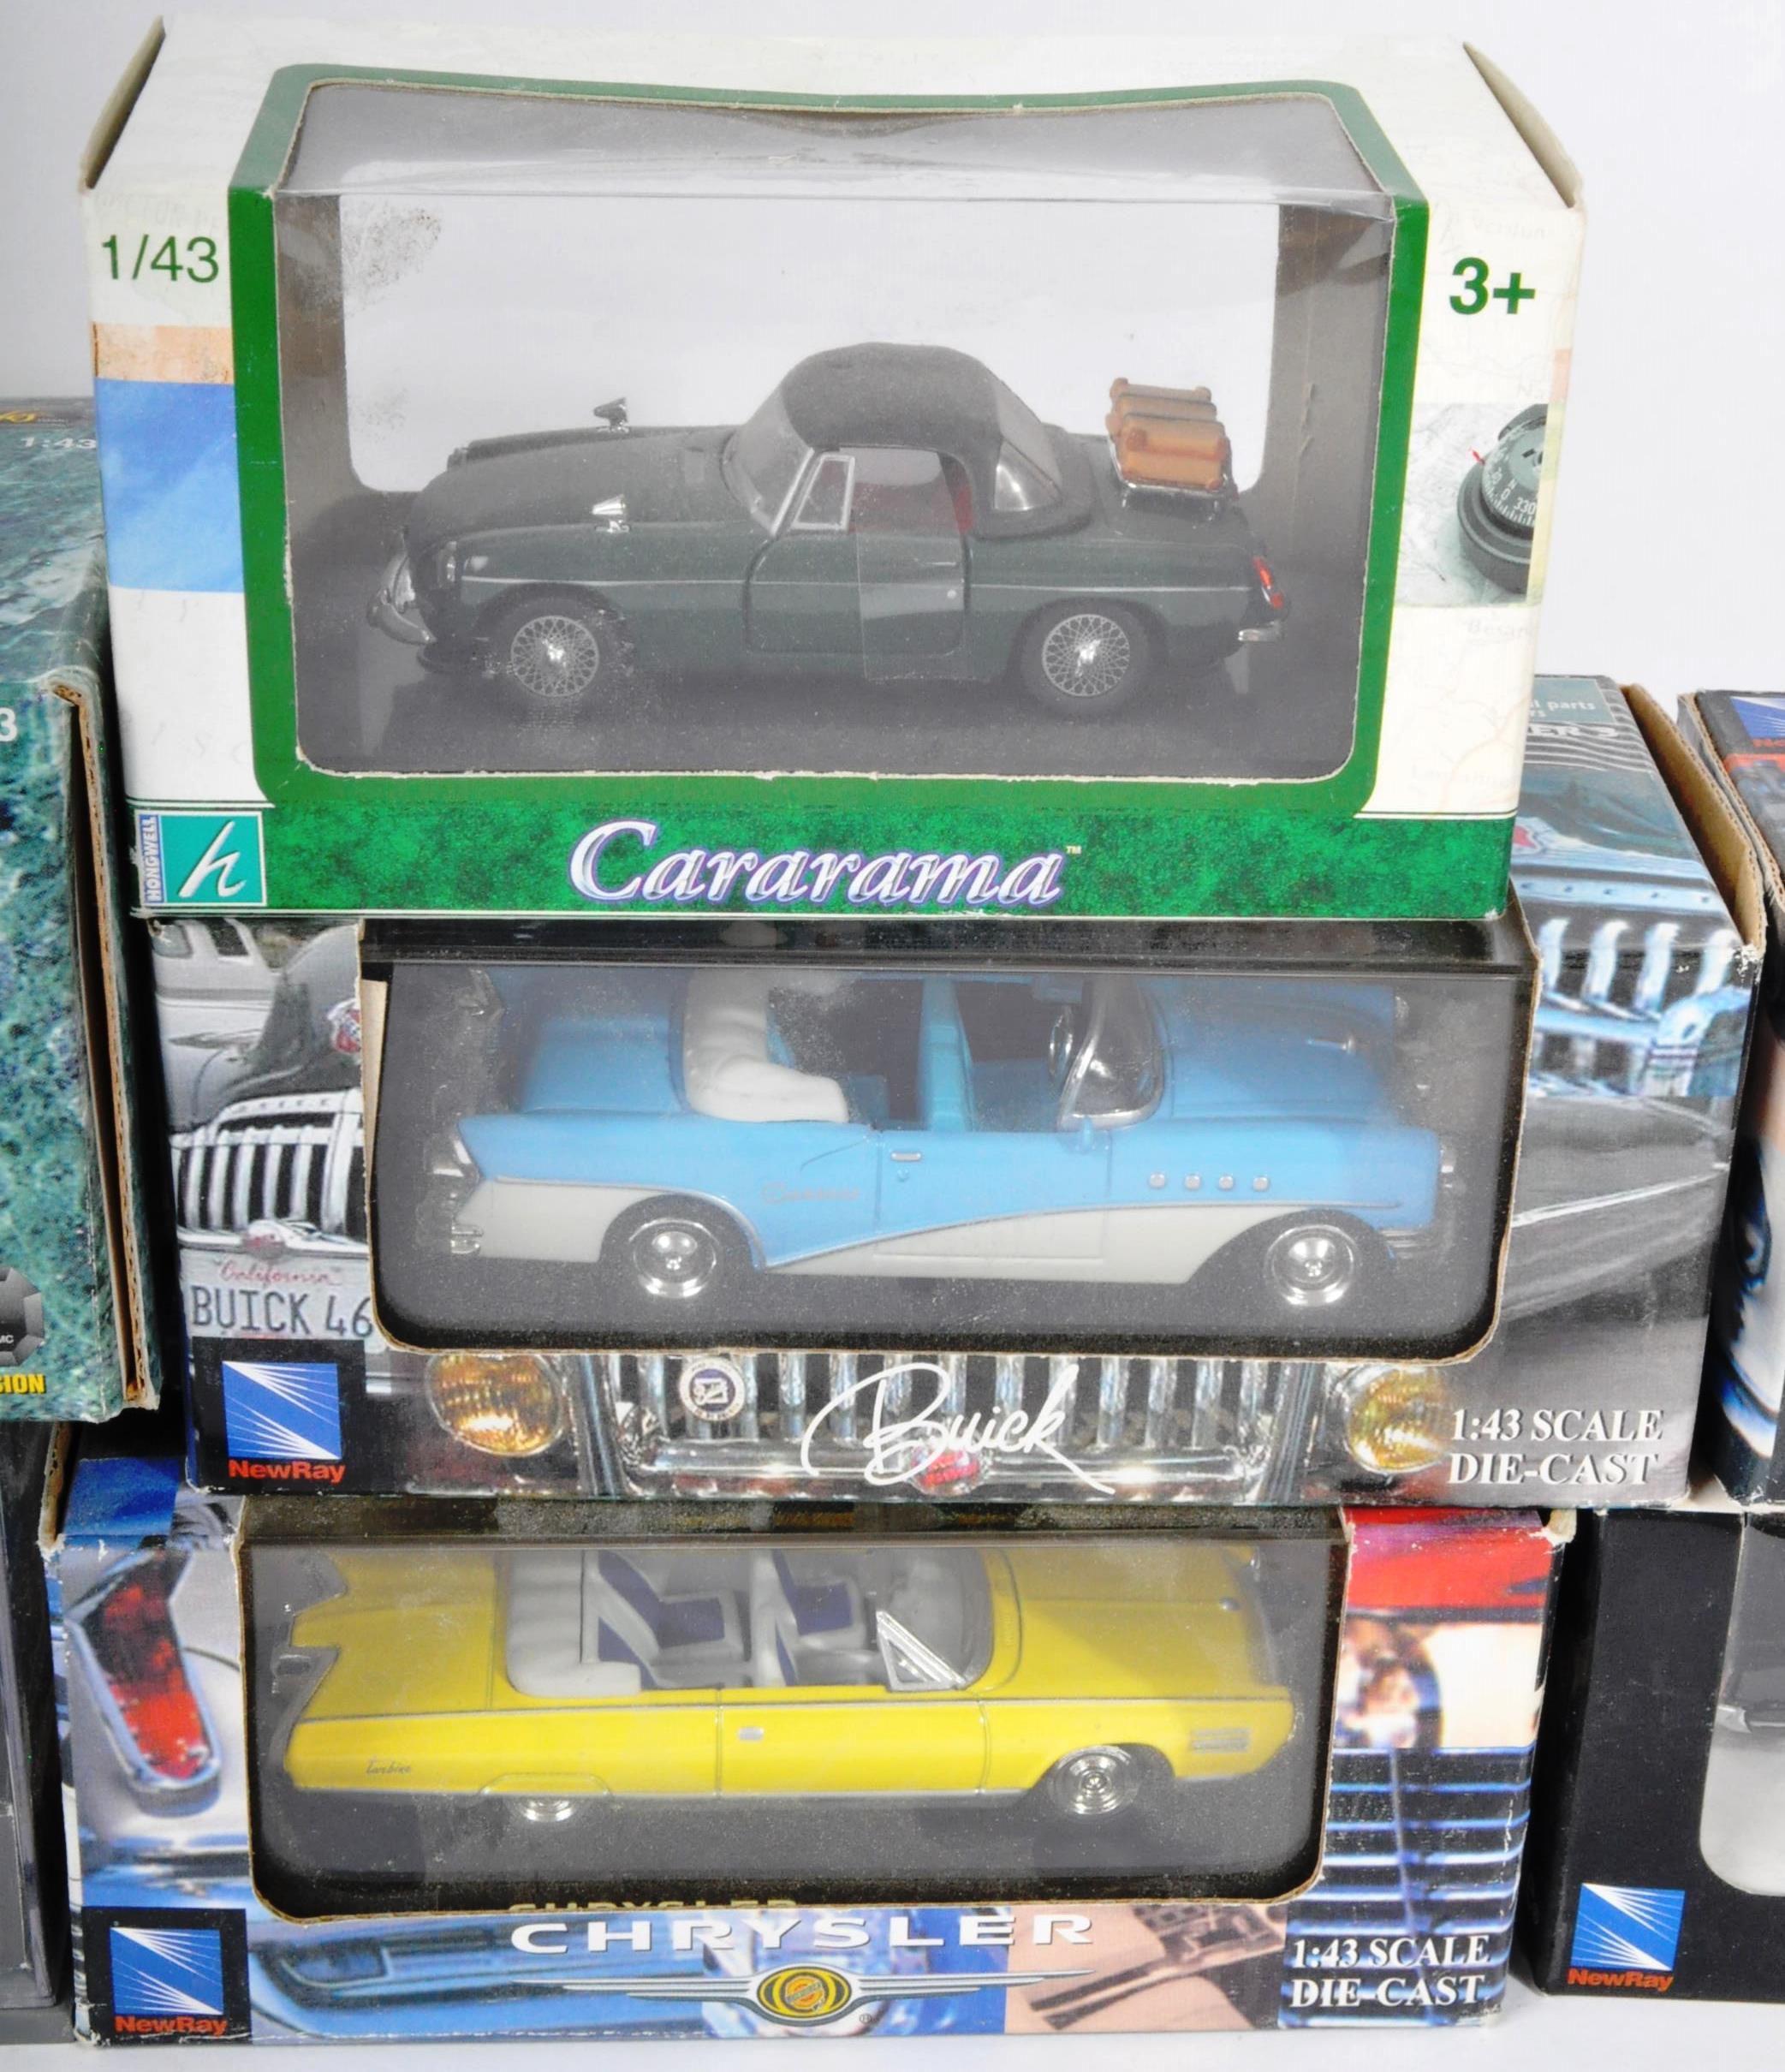 DIECAST - COLLECTION OF 1/43 SCALE PRECISION DIECAST BOXED MODELS - Image 5 of 6